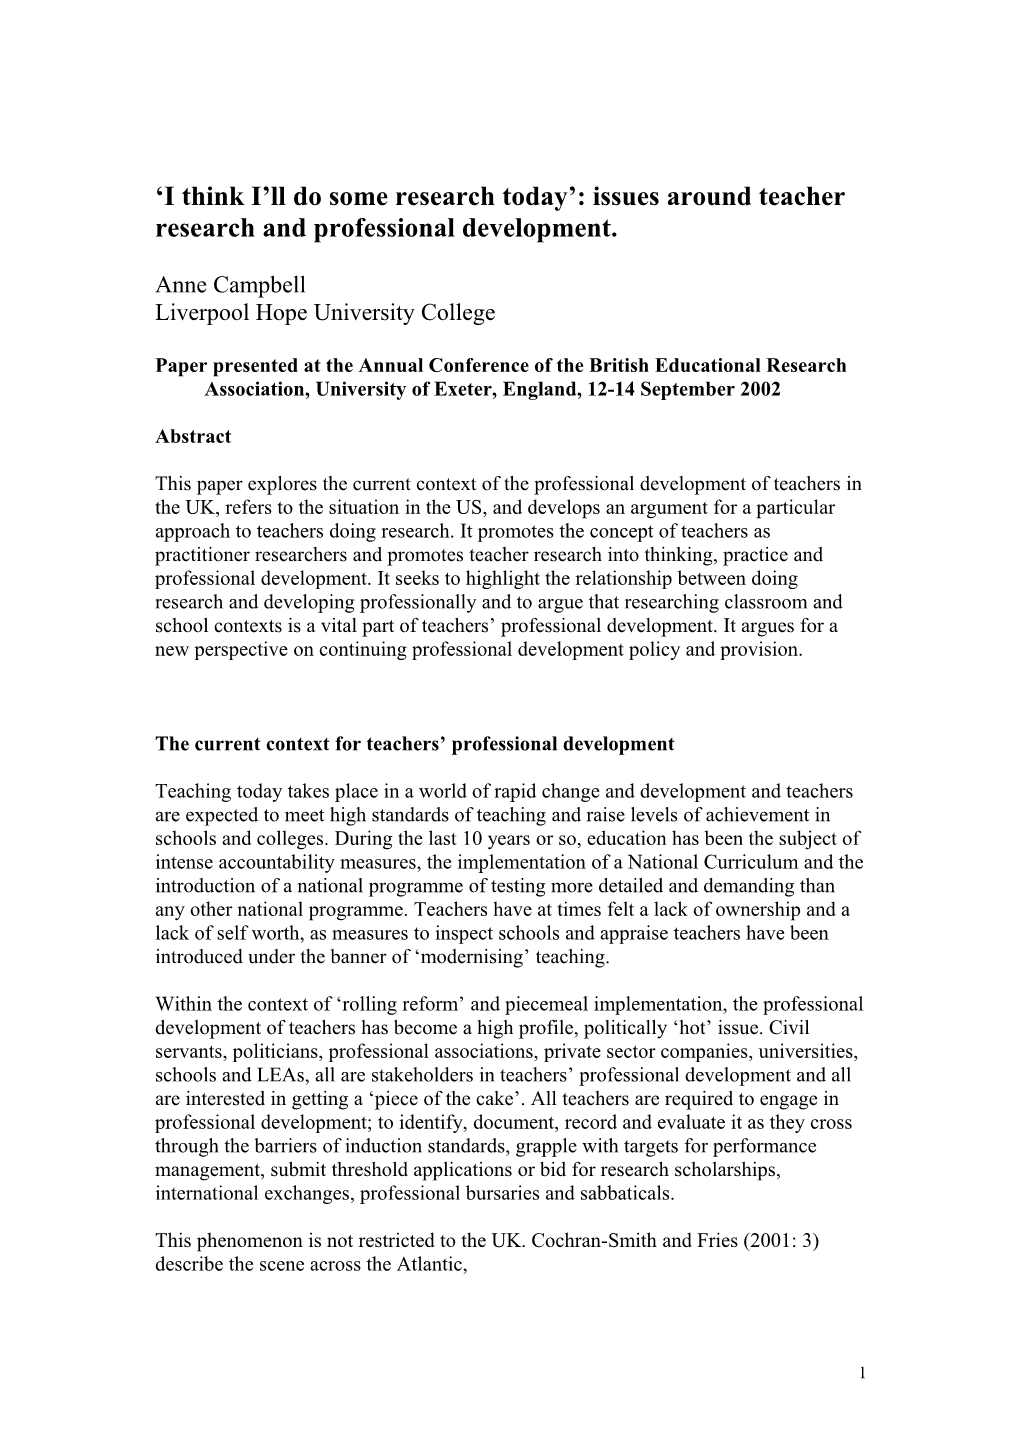 I Think I Ll Do Some Research Today : Issues Around Teacher Research and Professional